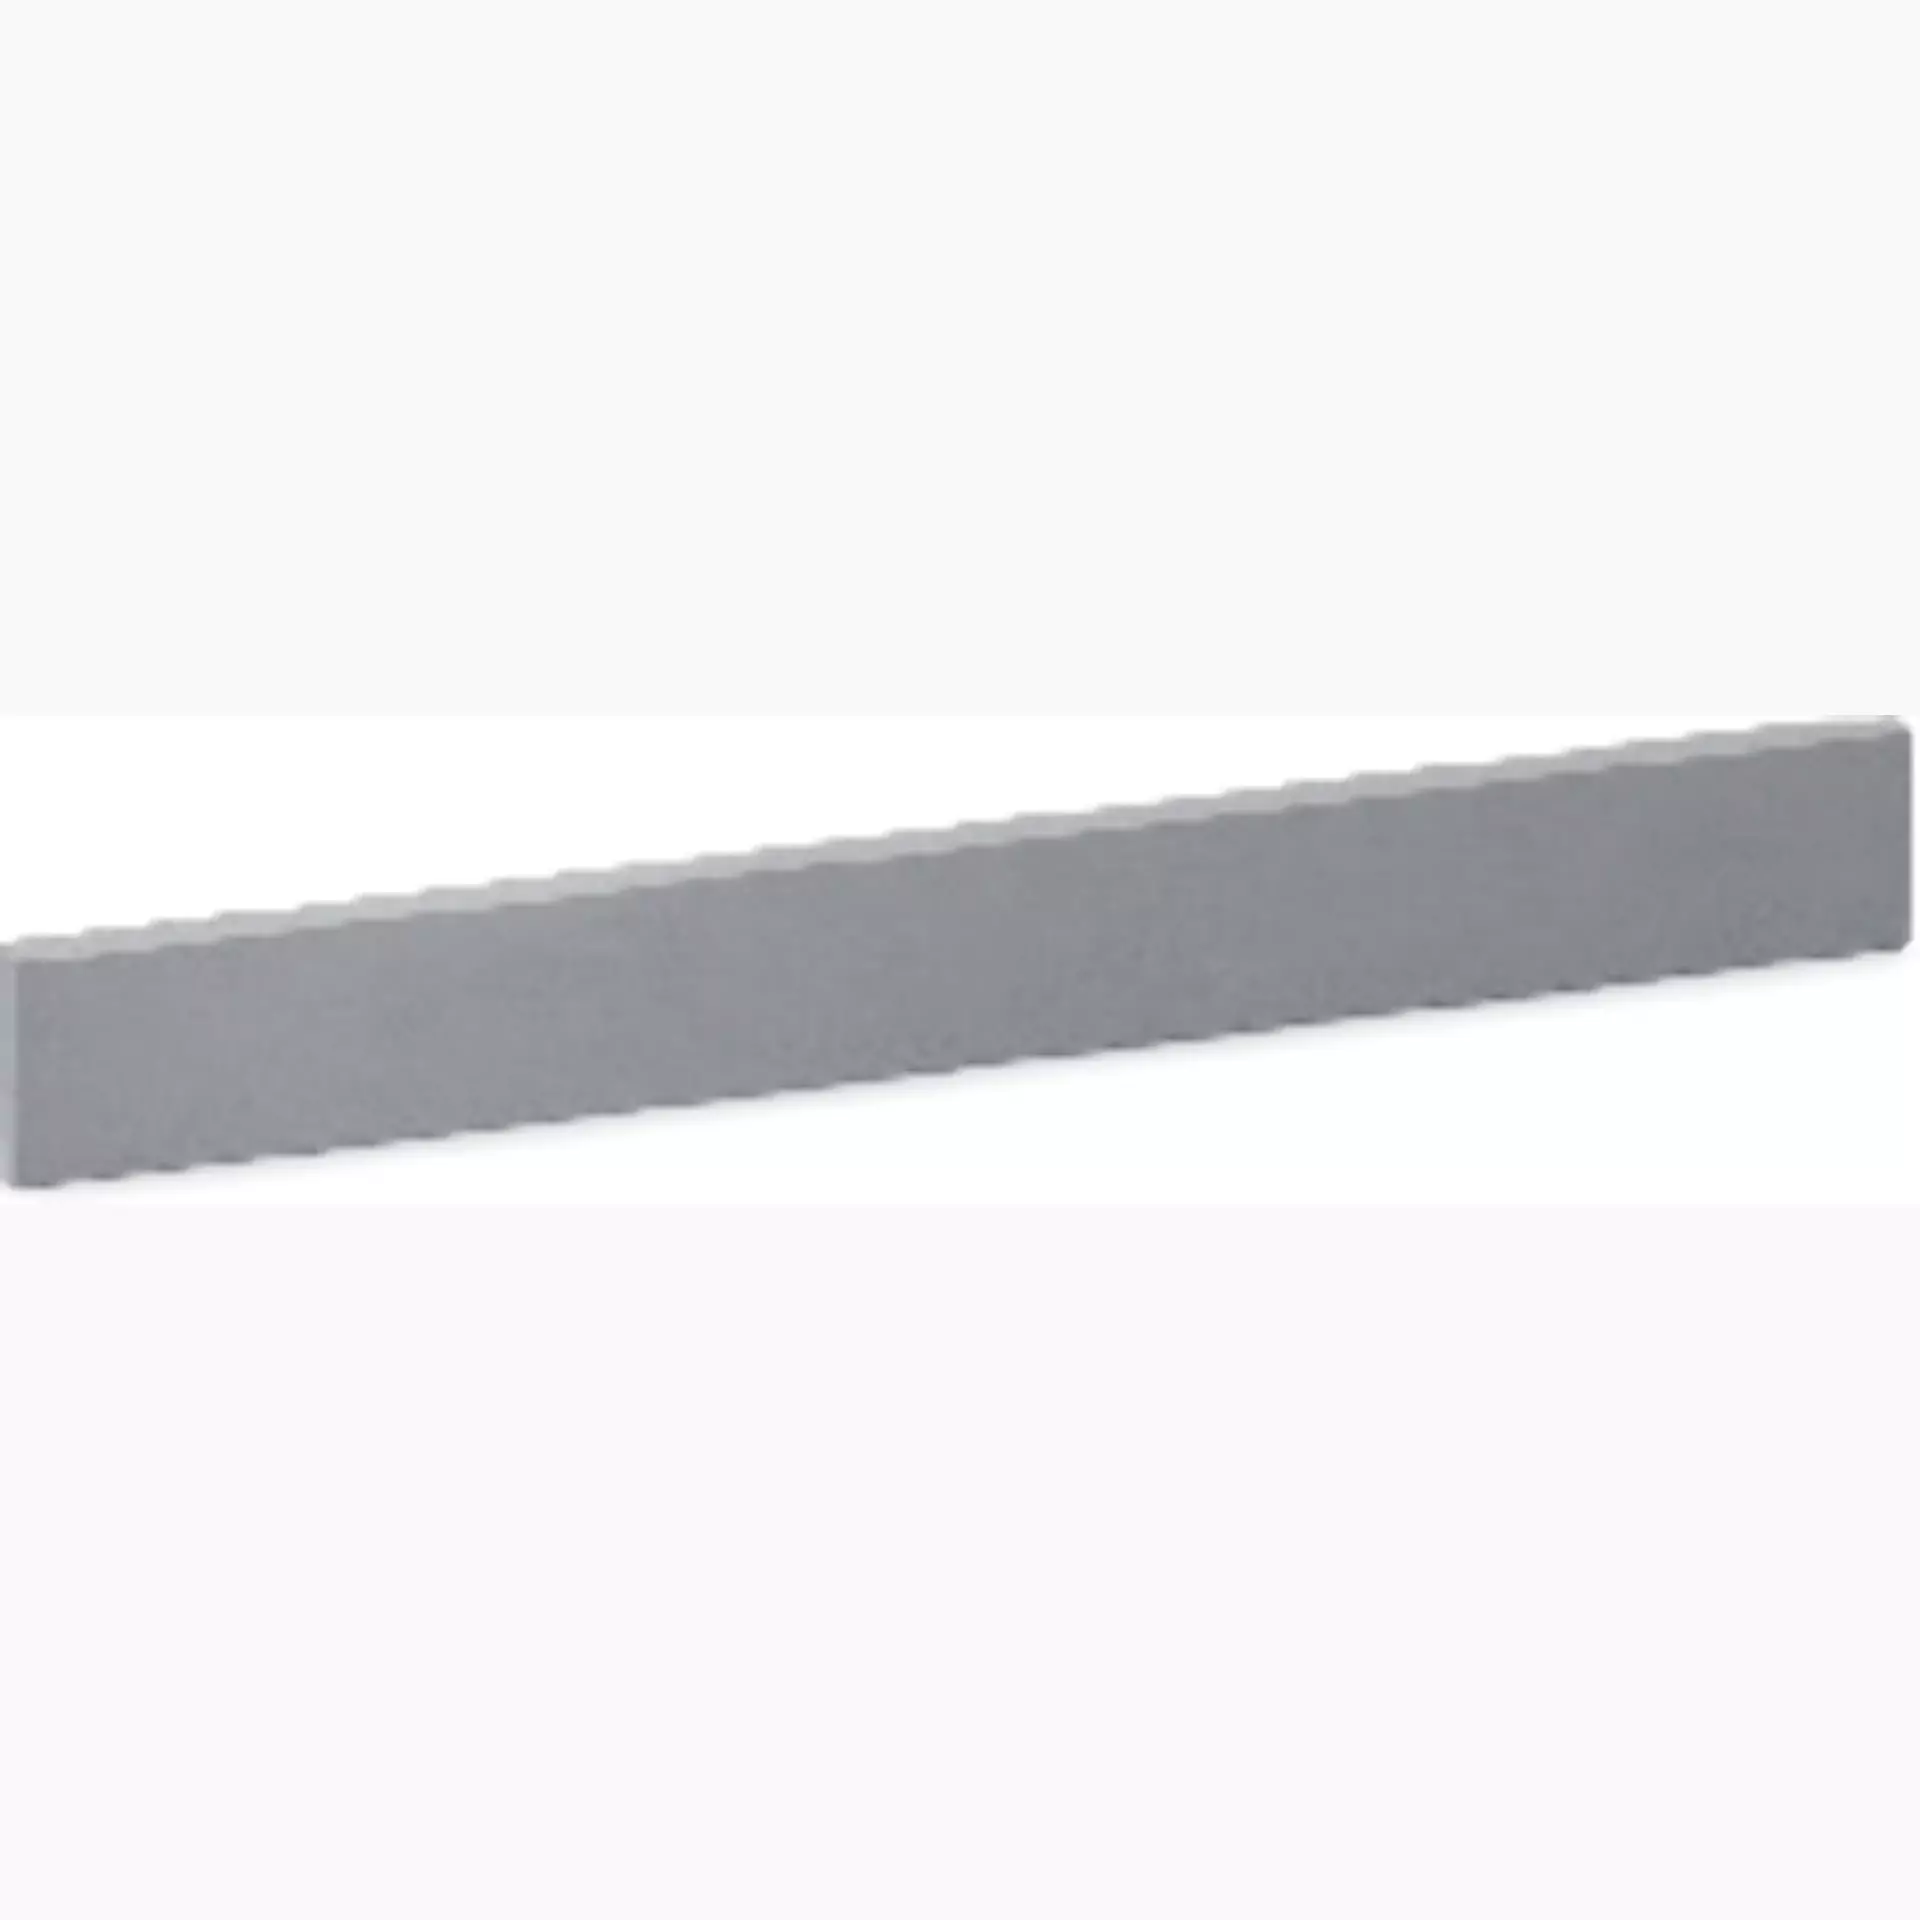 Sichenia Space Silver Skirting board 0177852 7x60cm rectified 10mm